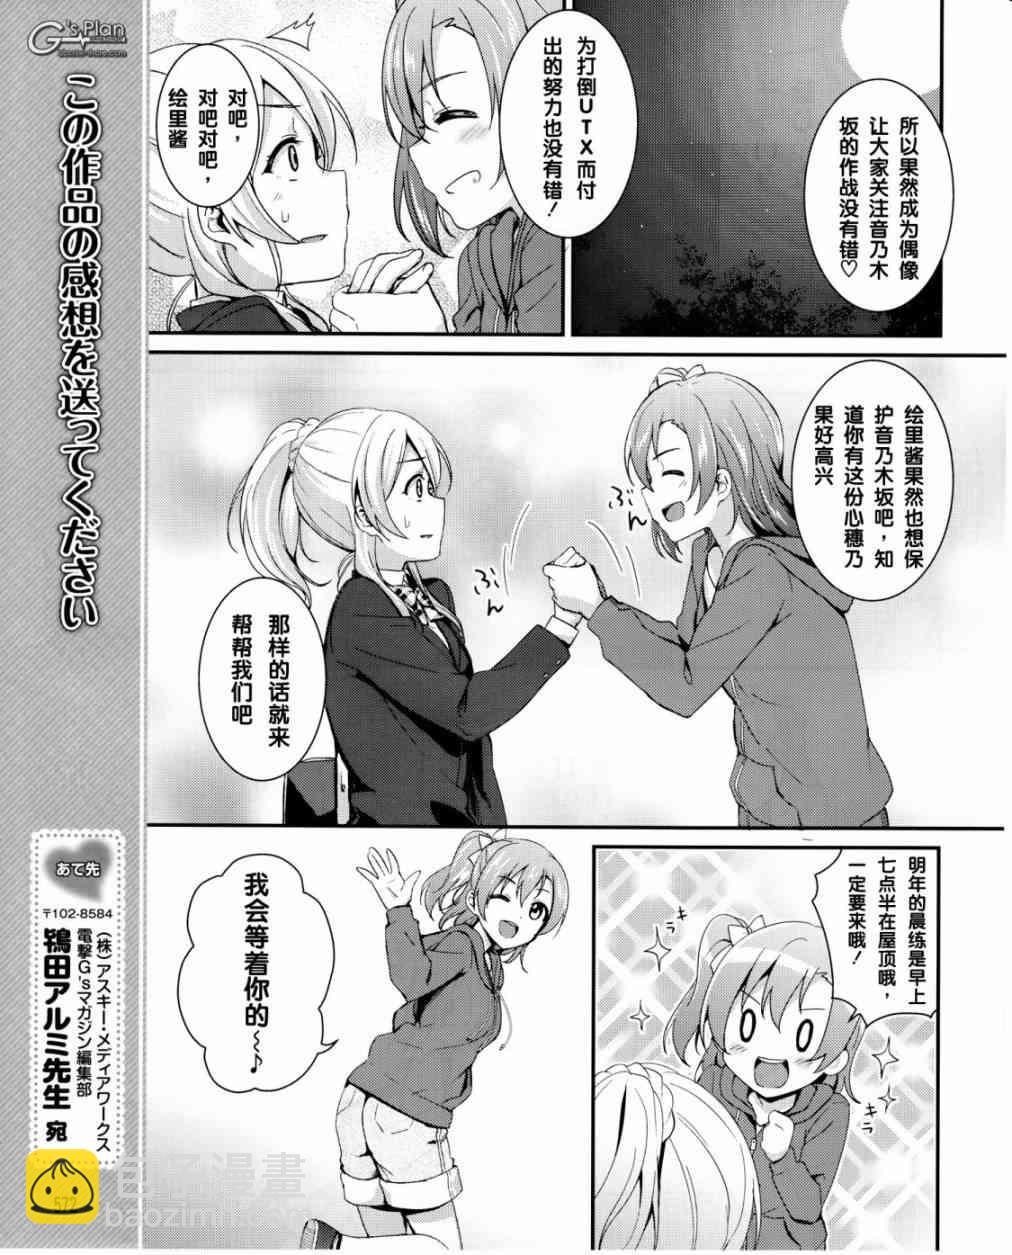 LoveLive - 16話 - 4